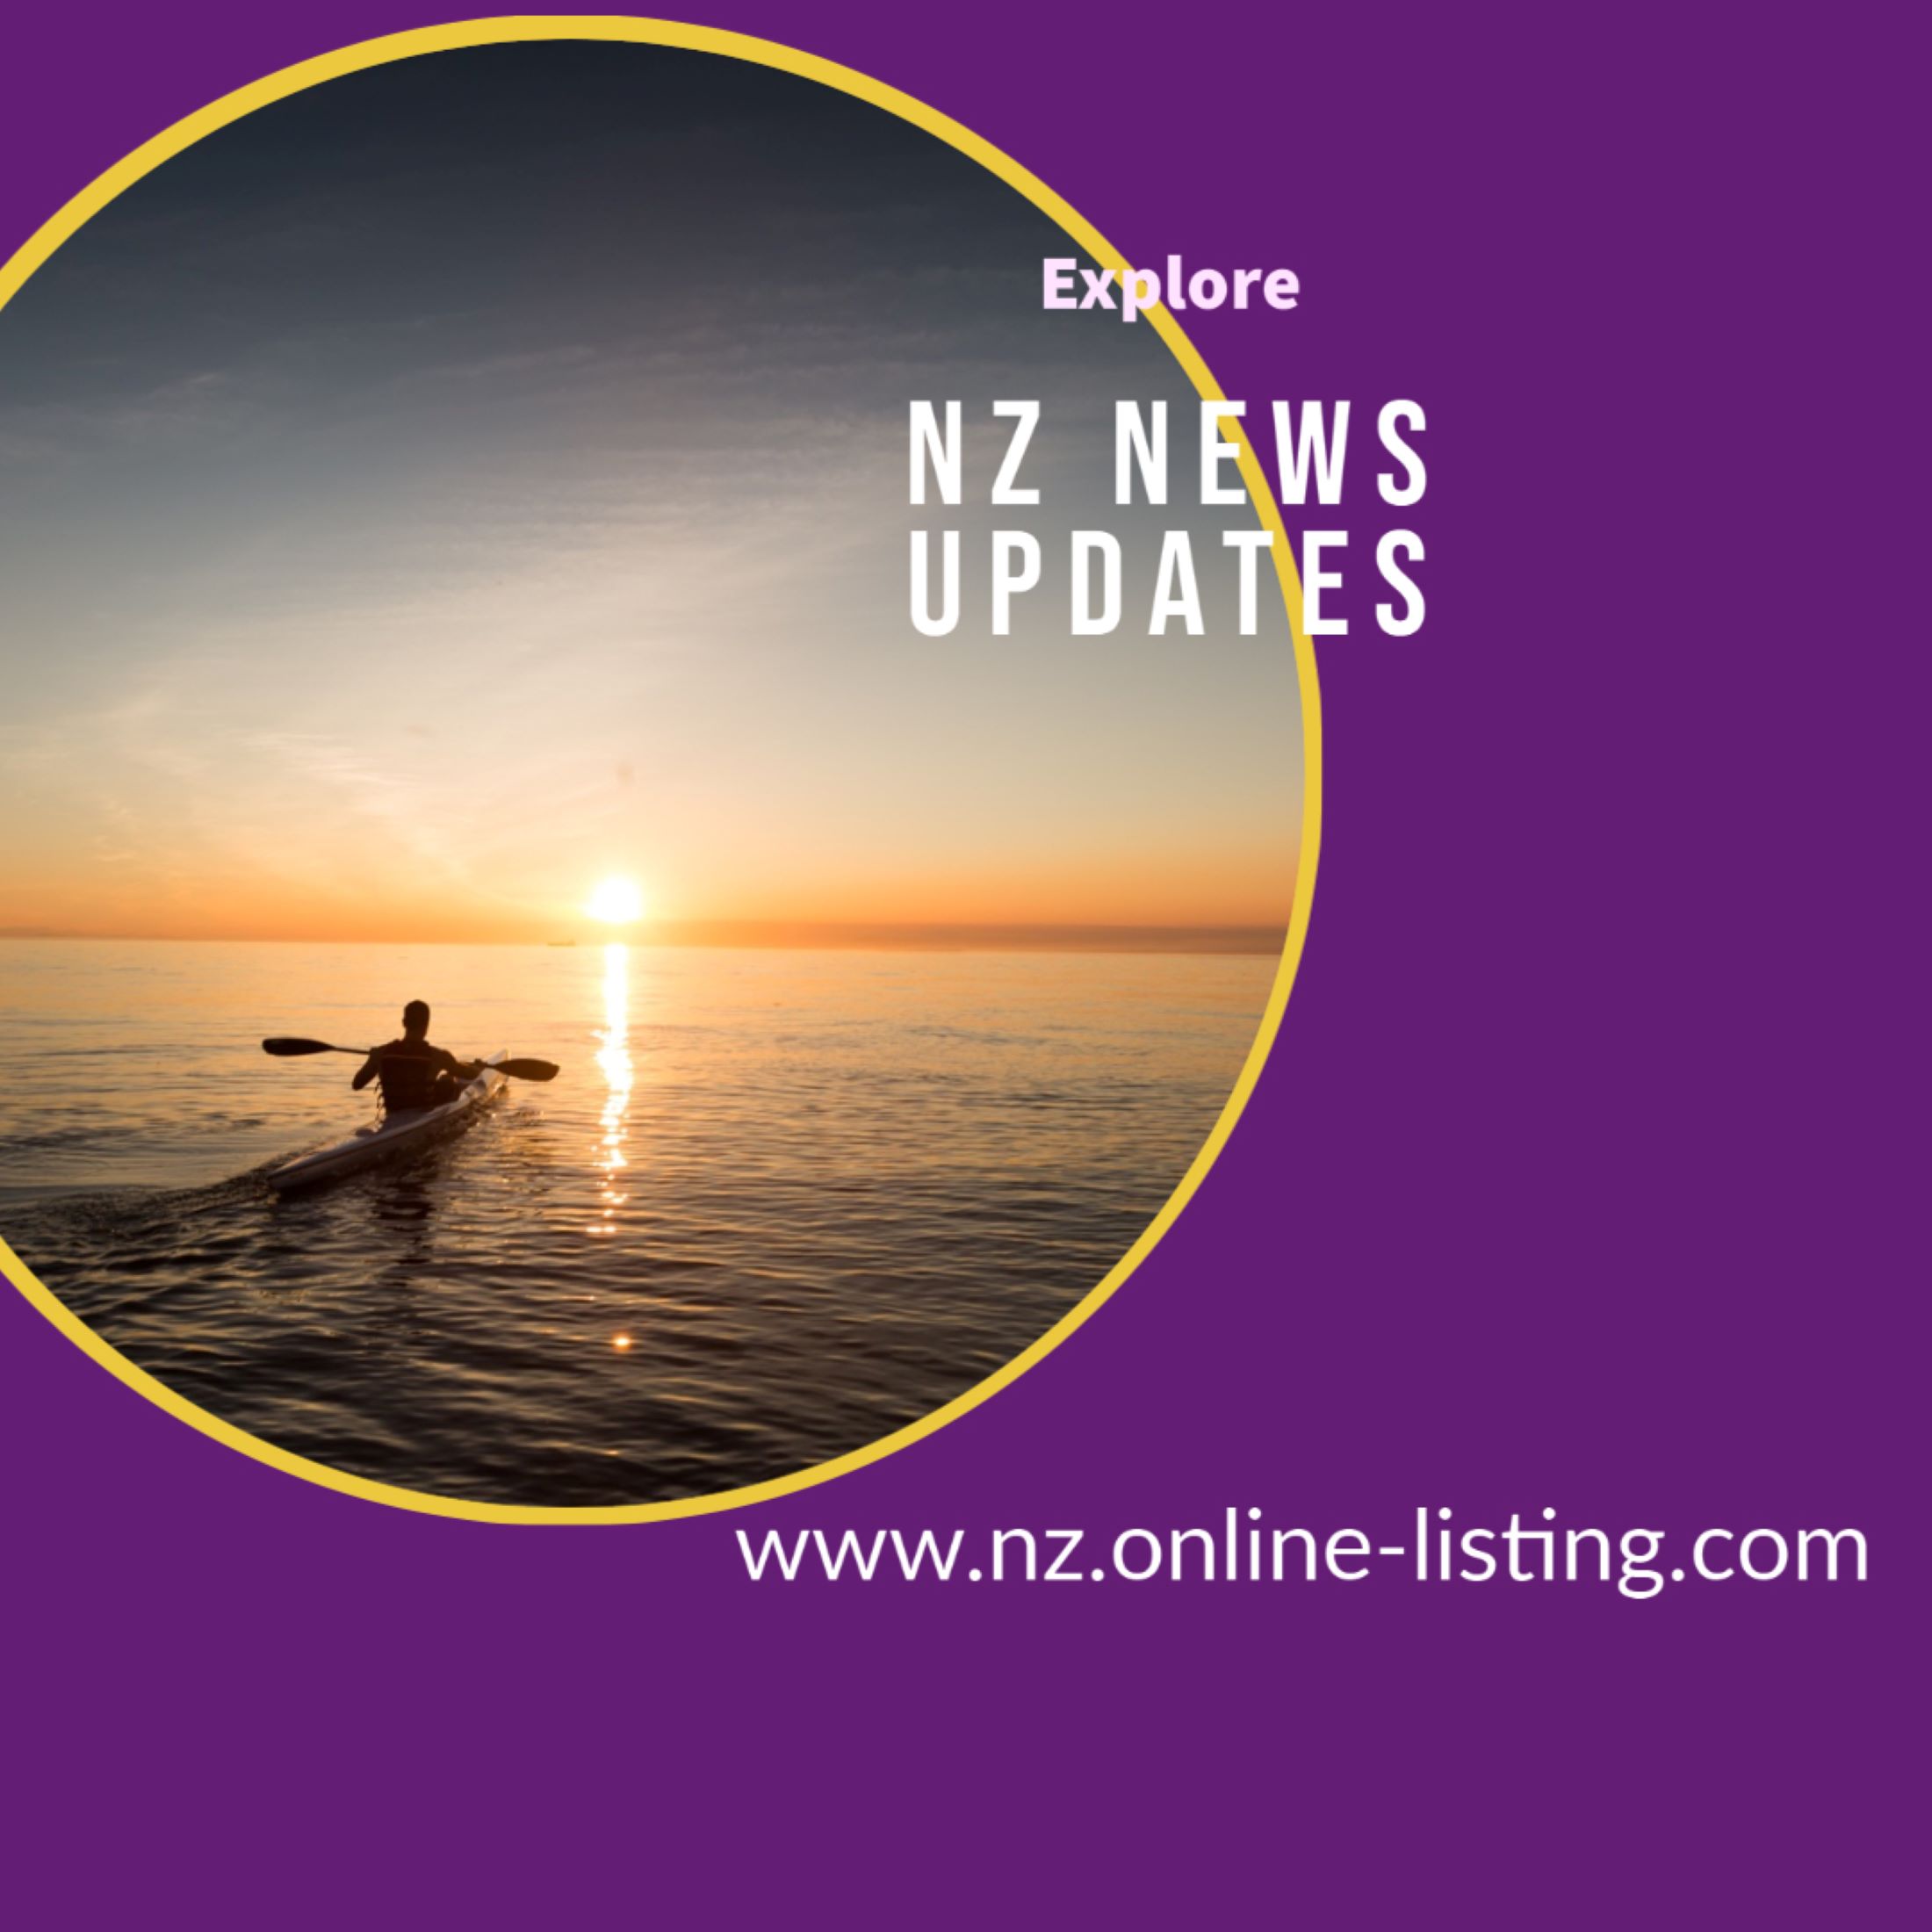 Search Latest Local News Channels Now in New Zealand Blog!